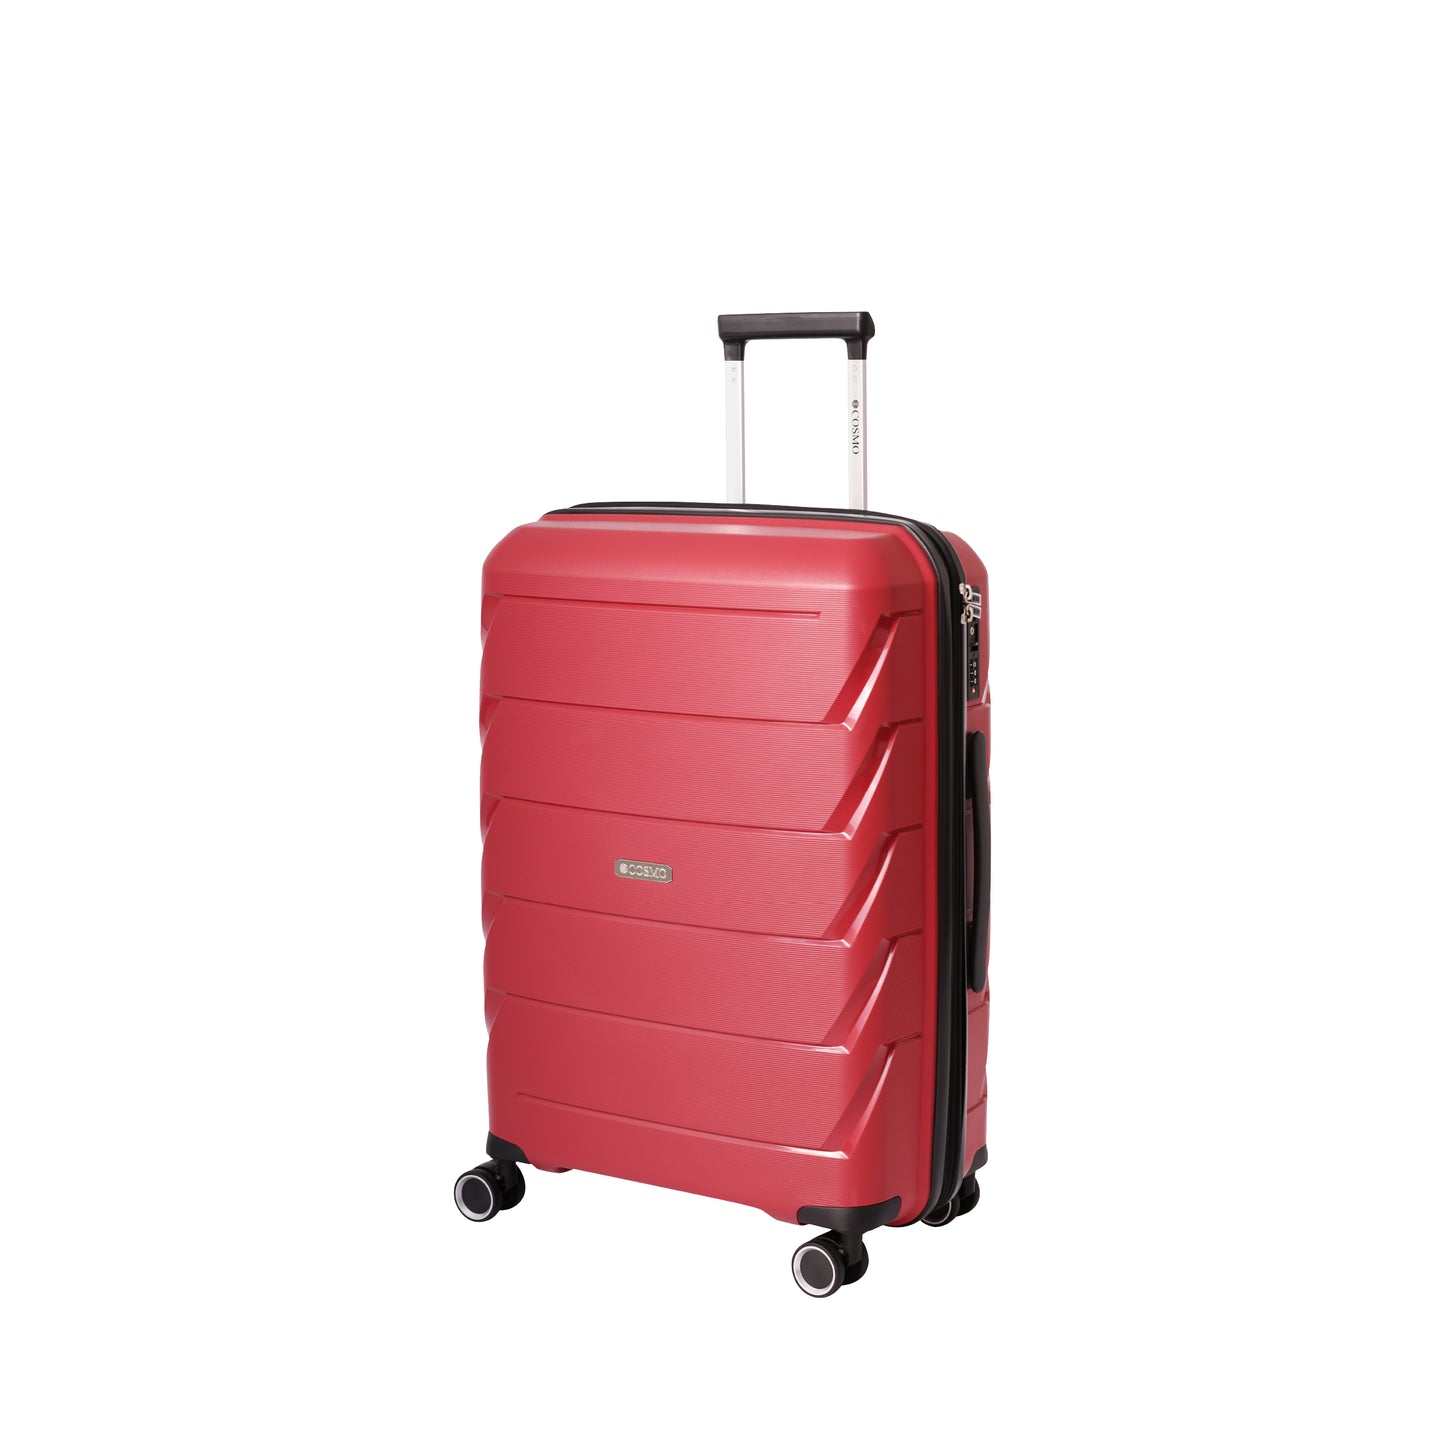 Cosmo Solitaire 60 cm Hard Luggage Trolley Case